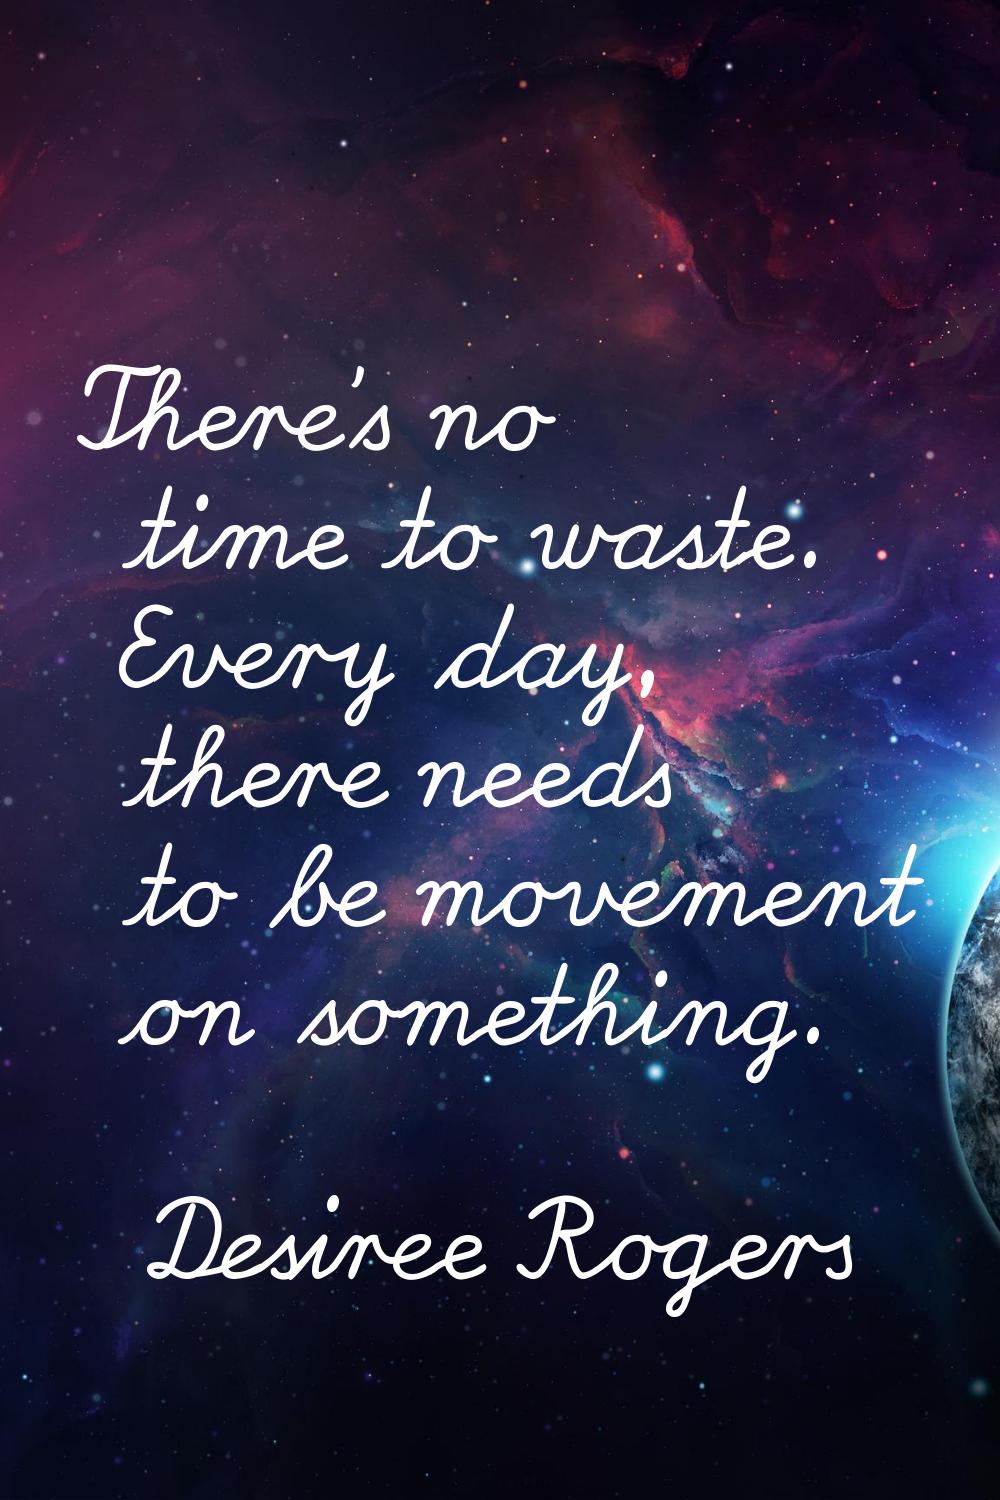 There's no time to waste. Every day, there needs to be movement on something.